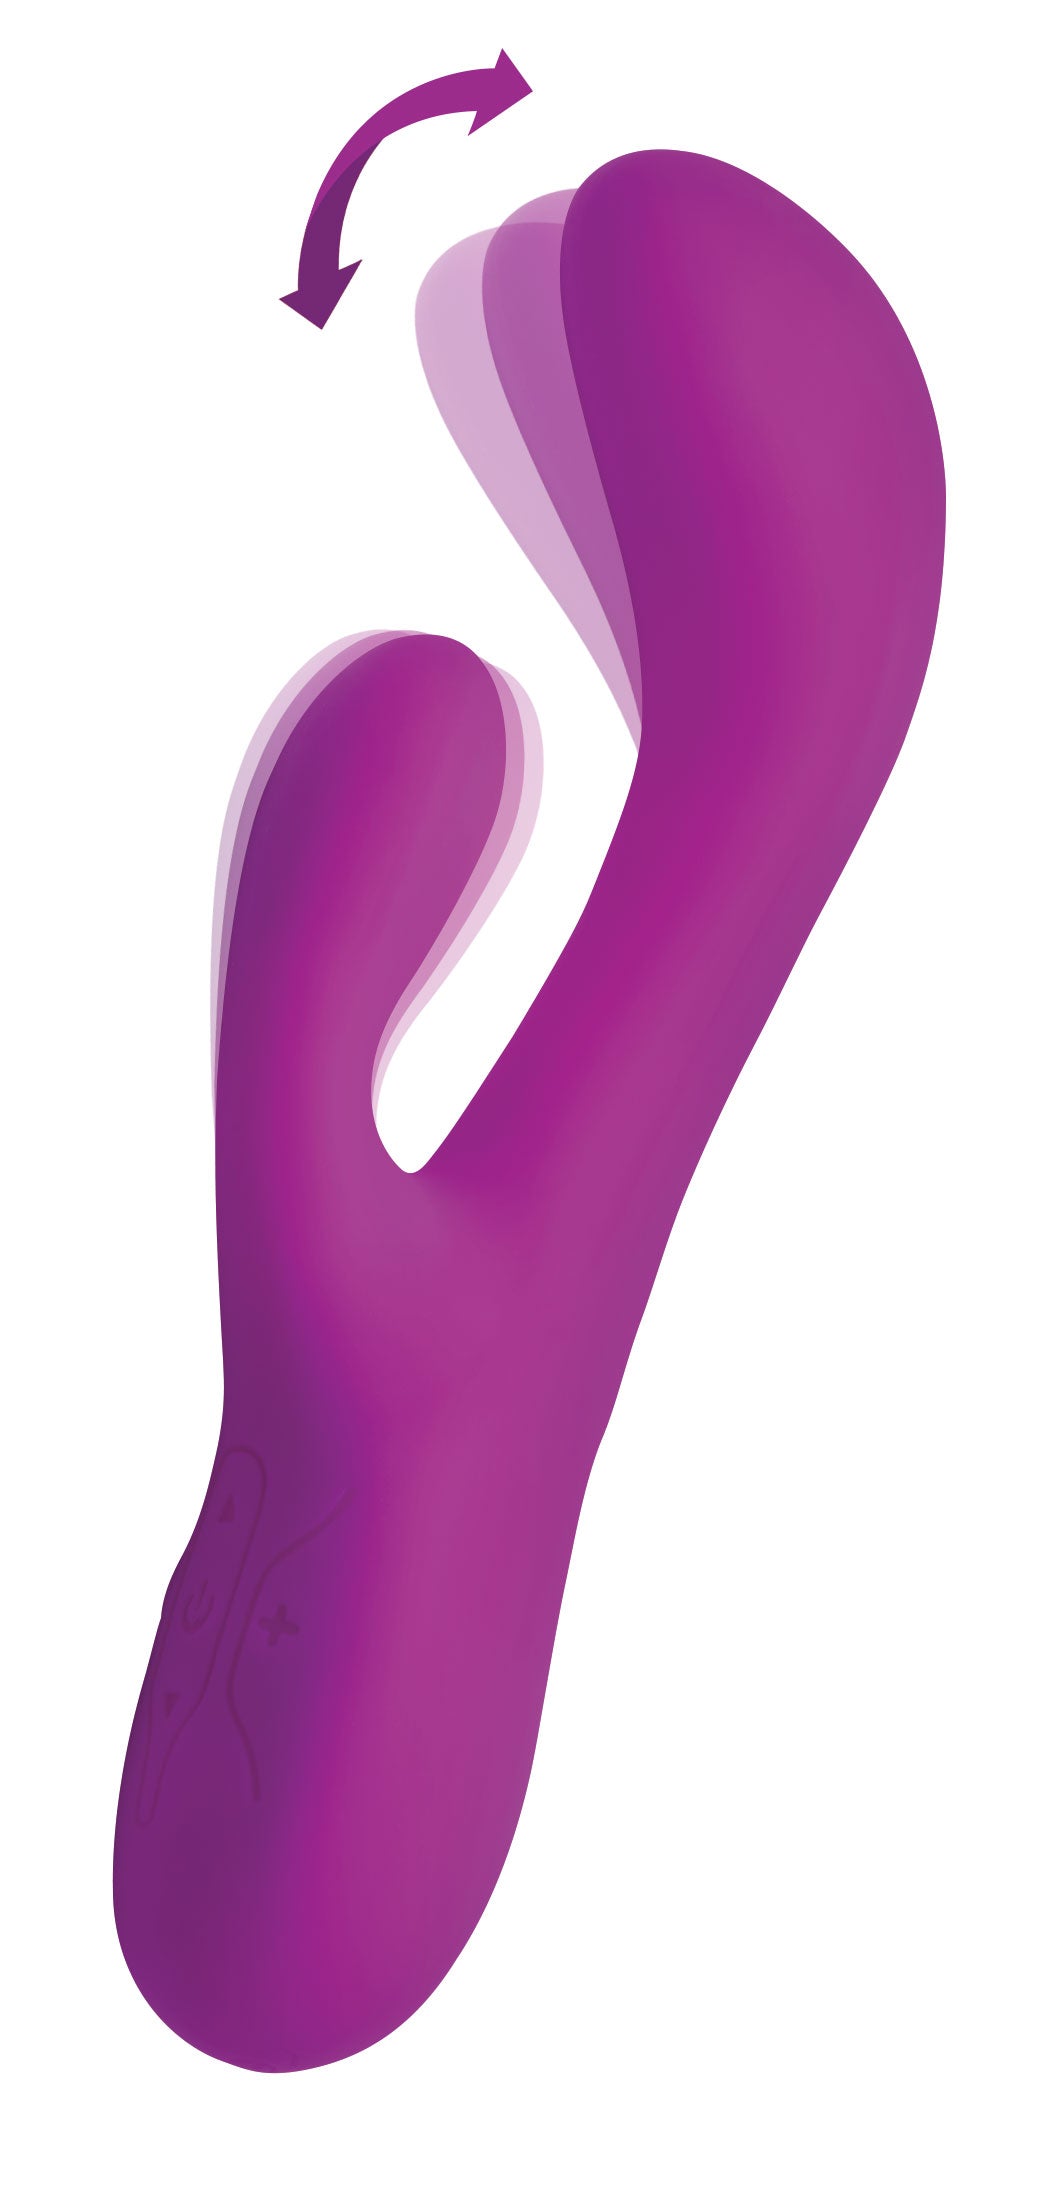 Come Hither Pro Silicone Rabbit Vibrator with Orgasmic Motion - UABDSM